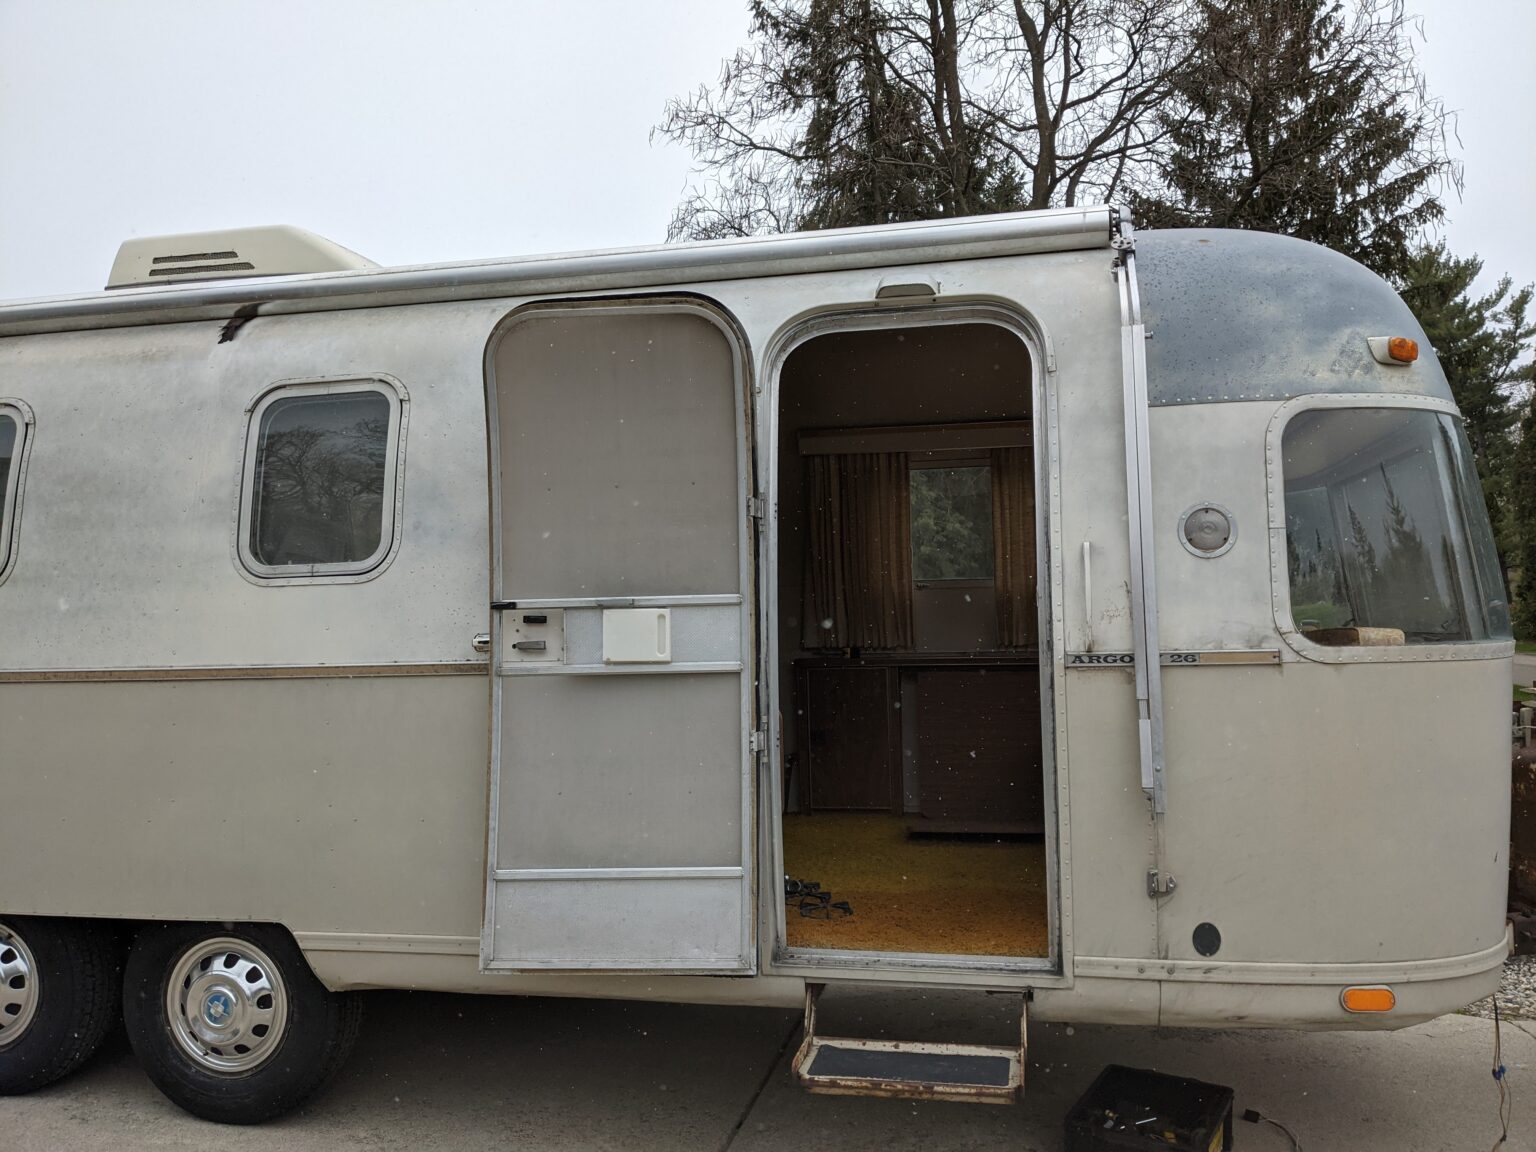 Our 1974 Airstream Argosy Travel Trailer Renovation Project